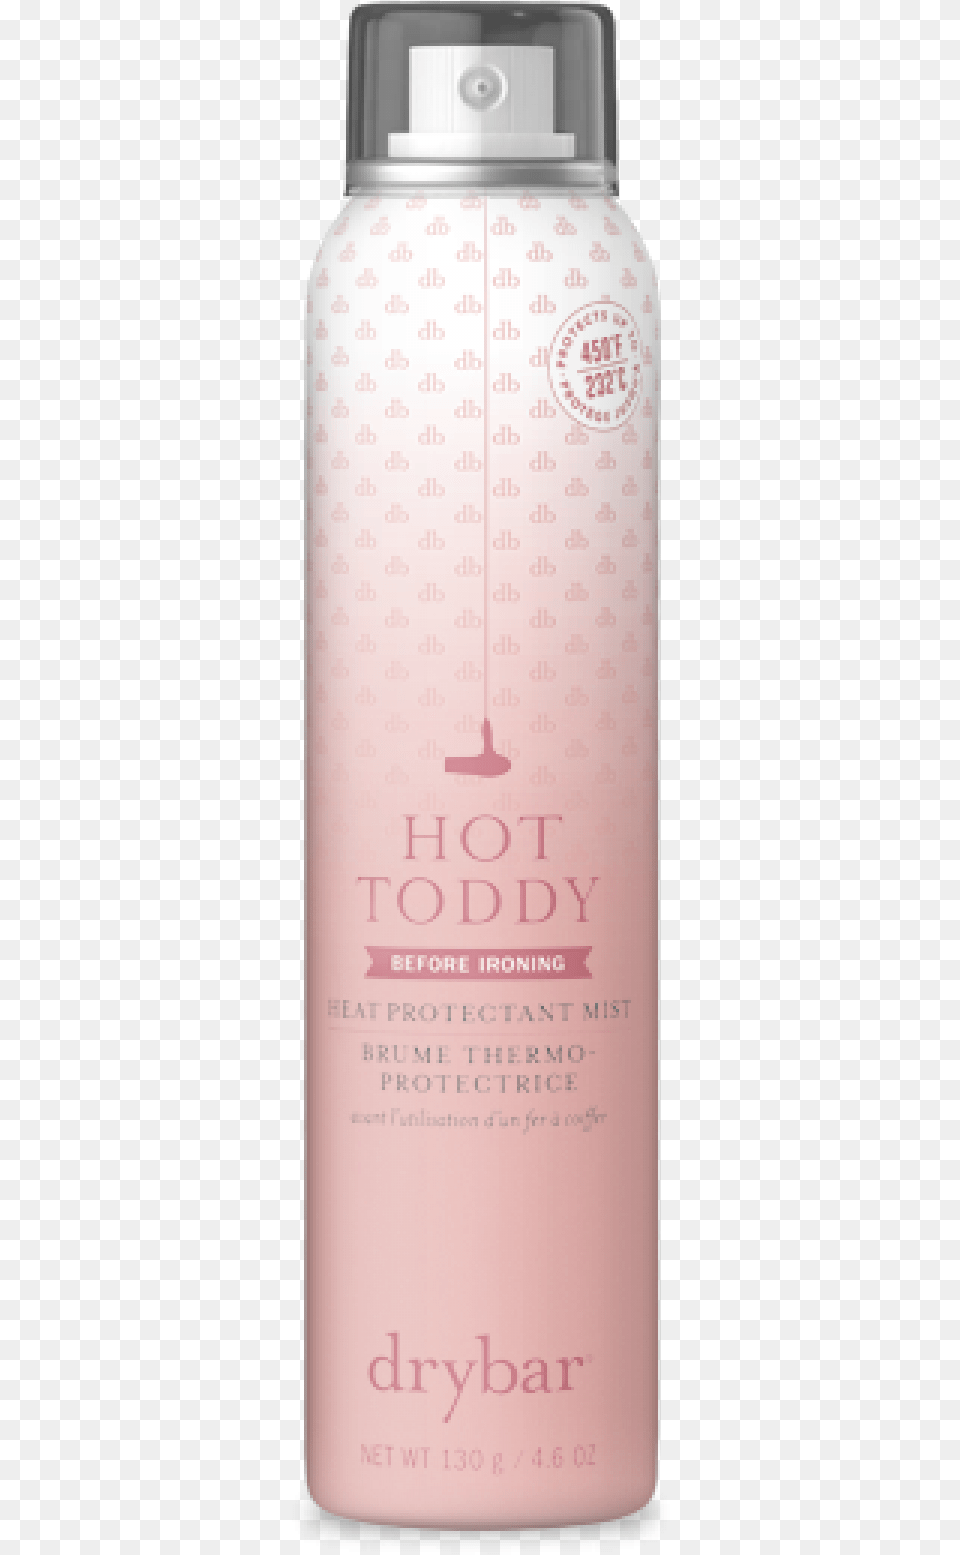 Drybar Hot Toddy Heat Protectant Mist, Bottle, Cosmetics Png